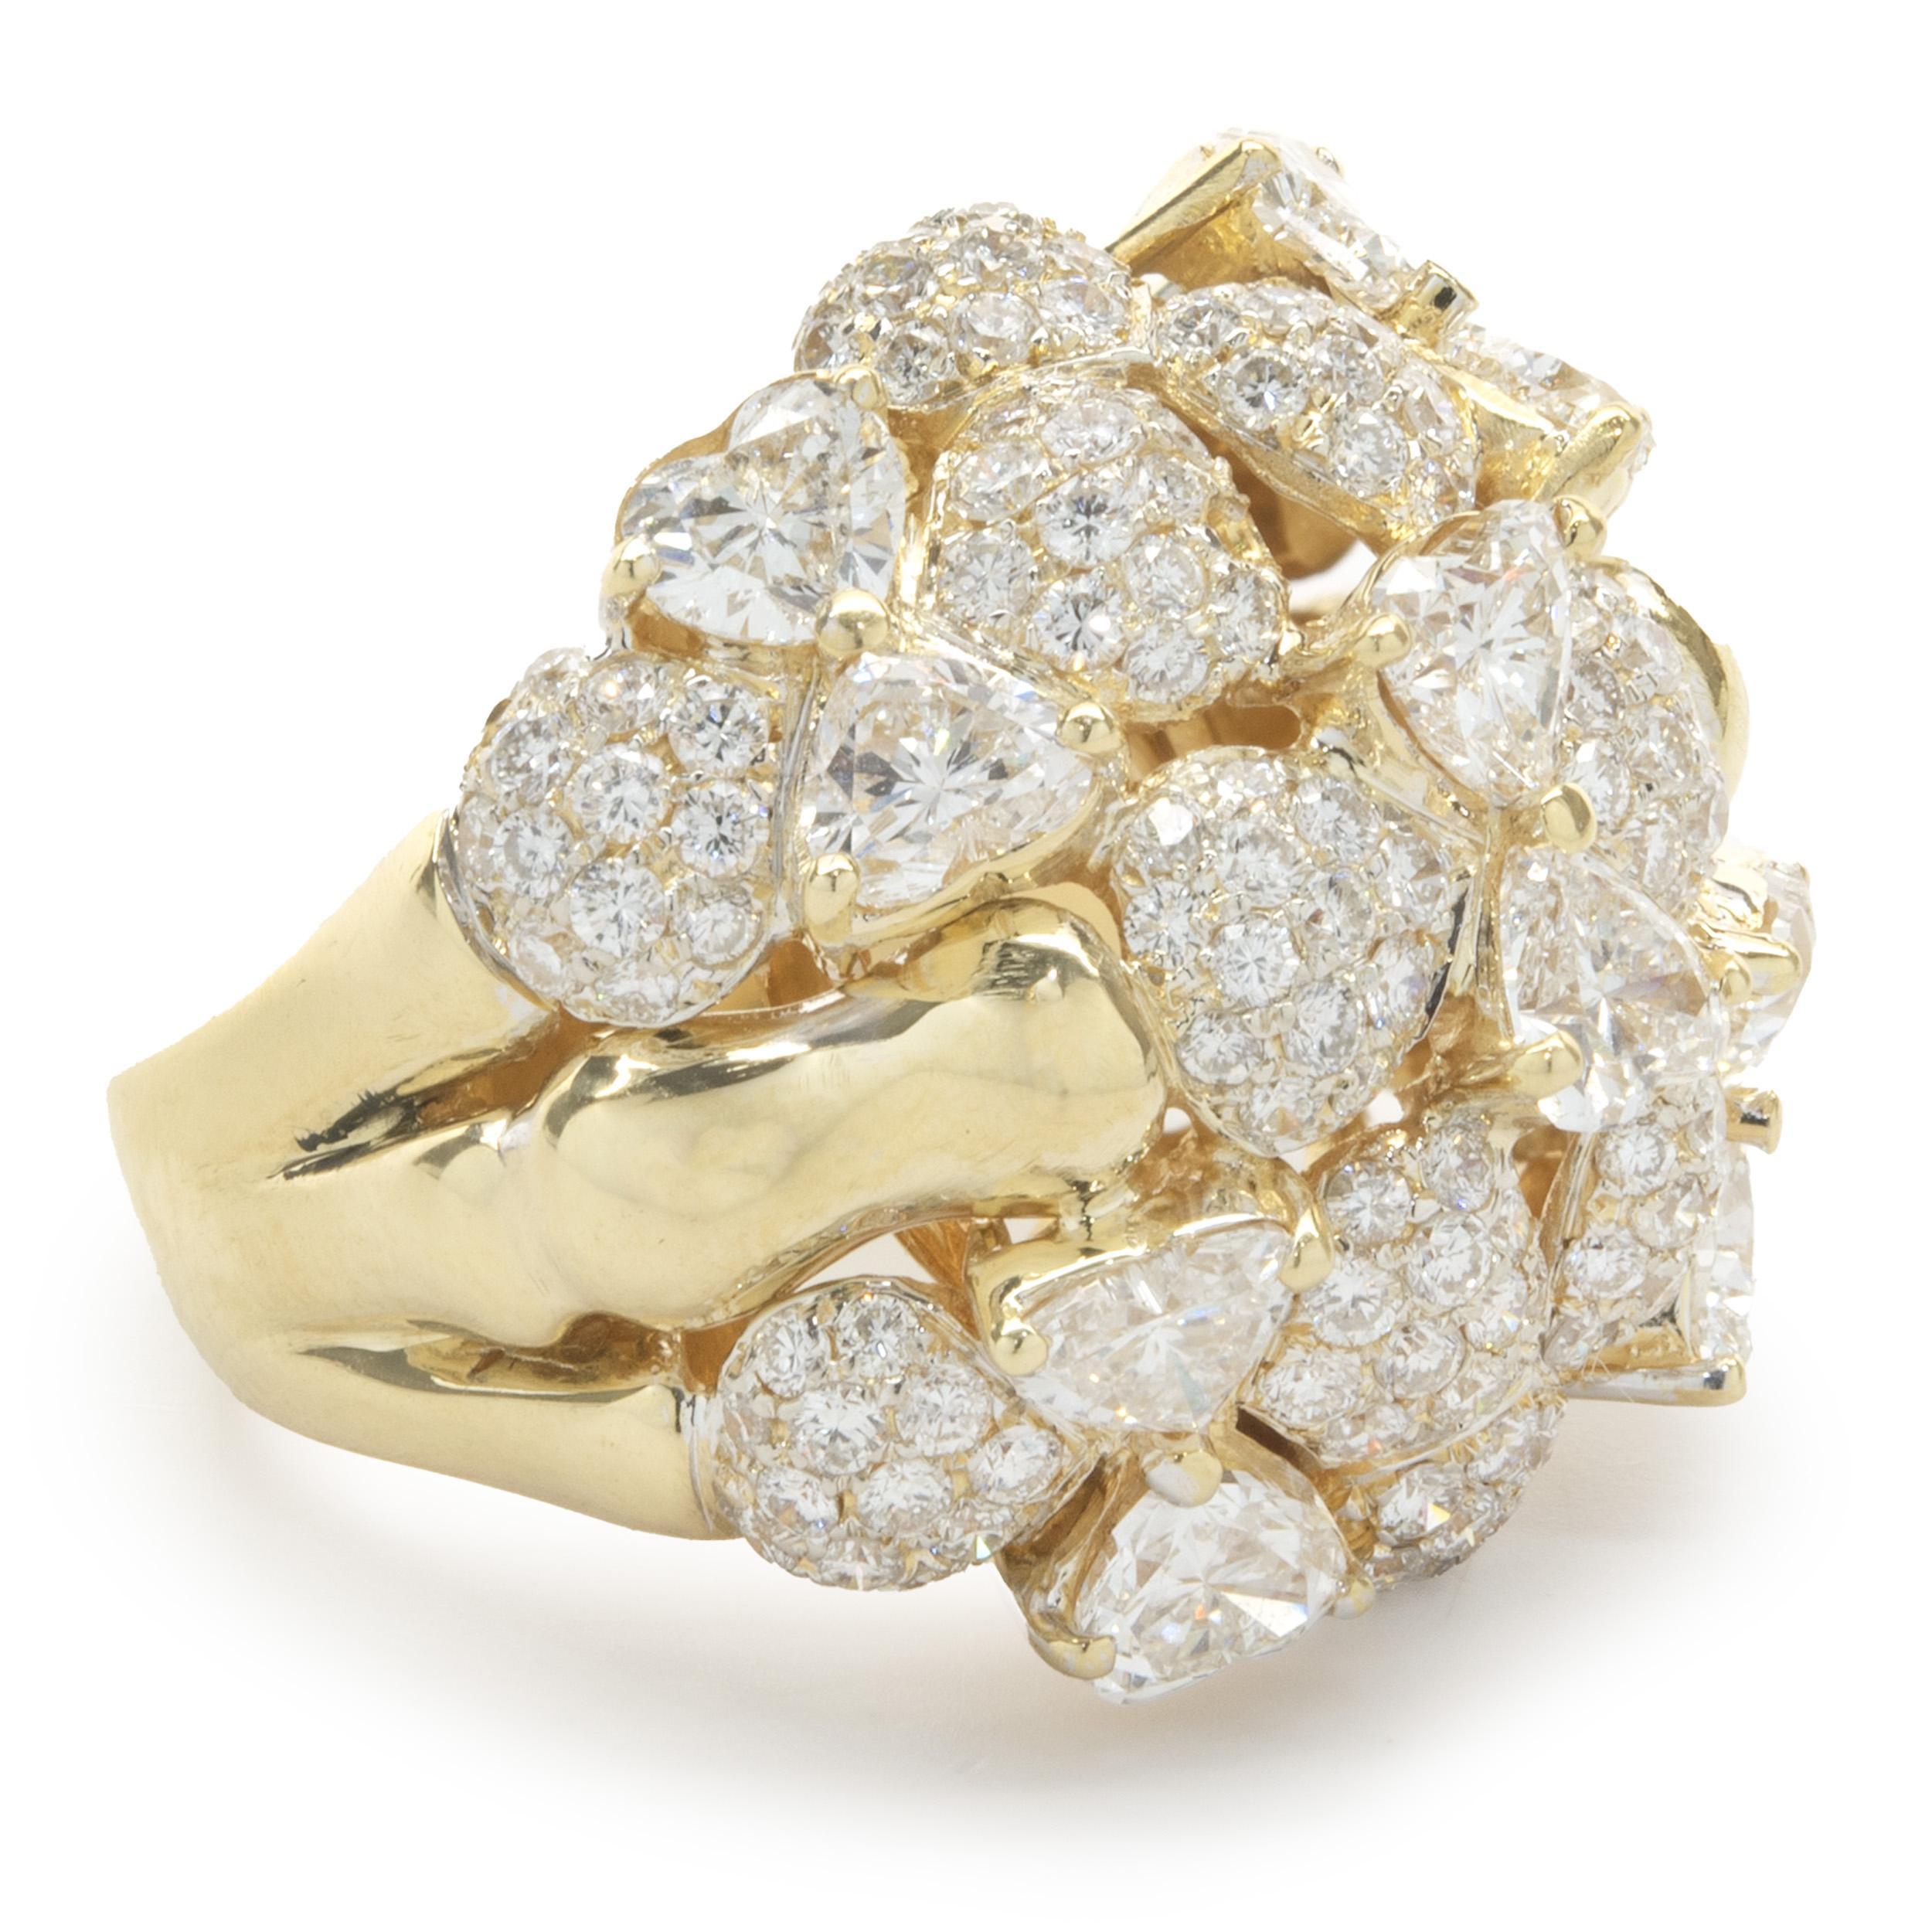 Designer: R.C.M
Material: 18K yellow gold
Diamonds: 156 round brilliant cut = 1.60cttw
Color: F
Clarity: VS2
Diamonds: 10 trillion cut = 2.40cttw
Color: F
Clarity: VS2
Dimensions: ring top measures 22mm wide
Size: 5.75 
Weight: 15.35 grams
